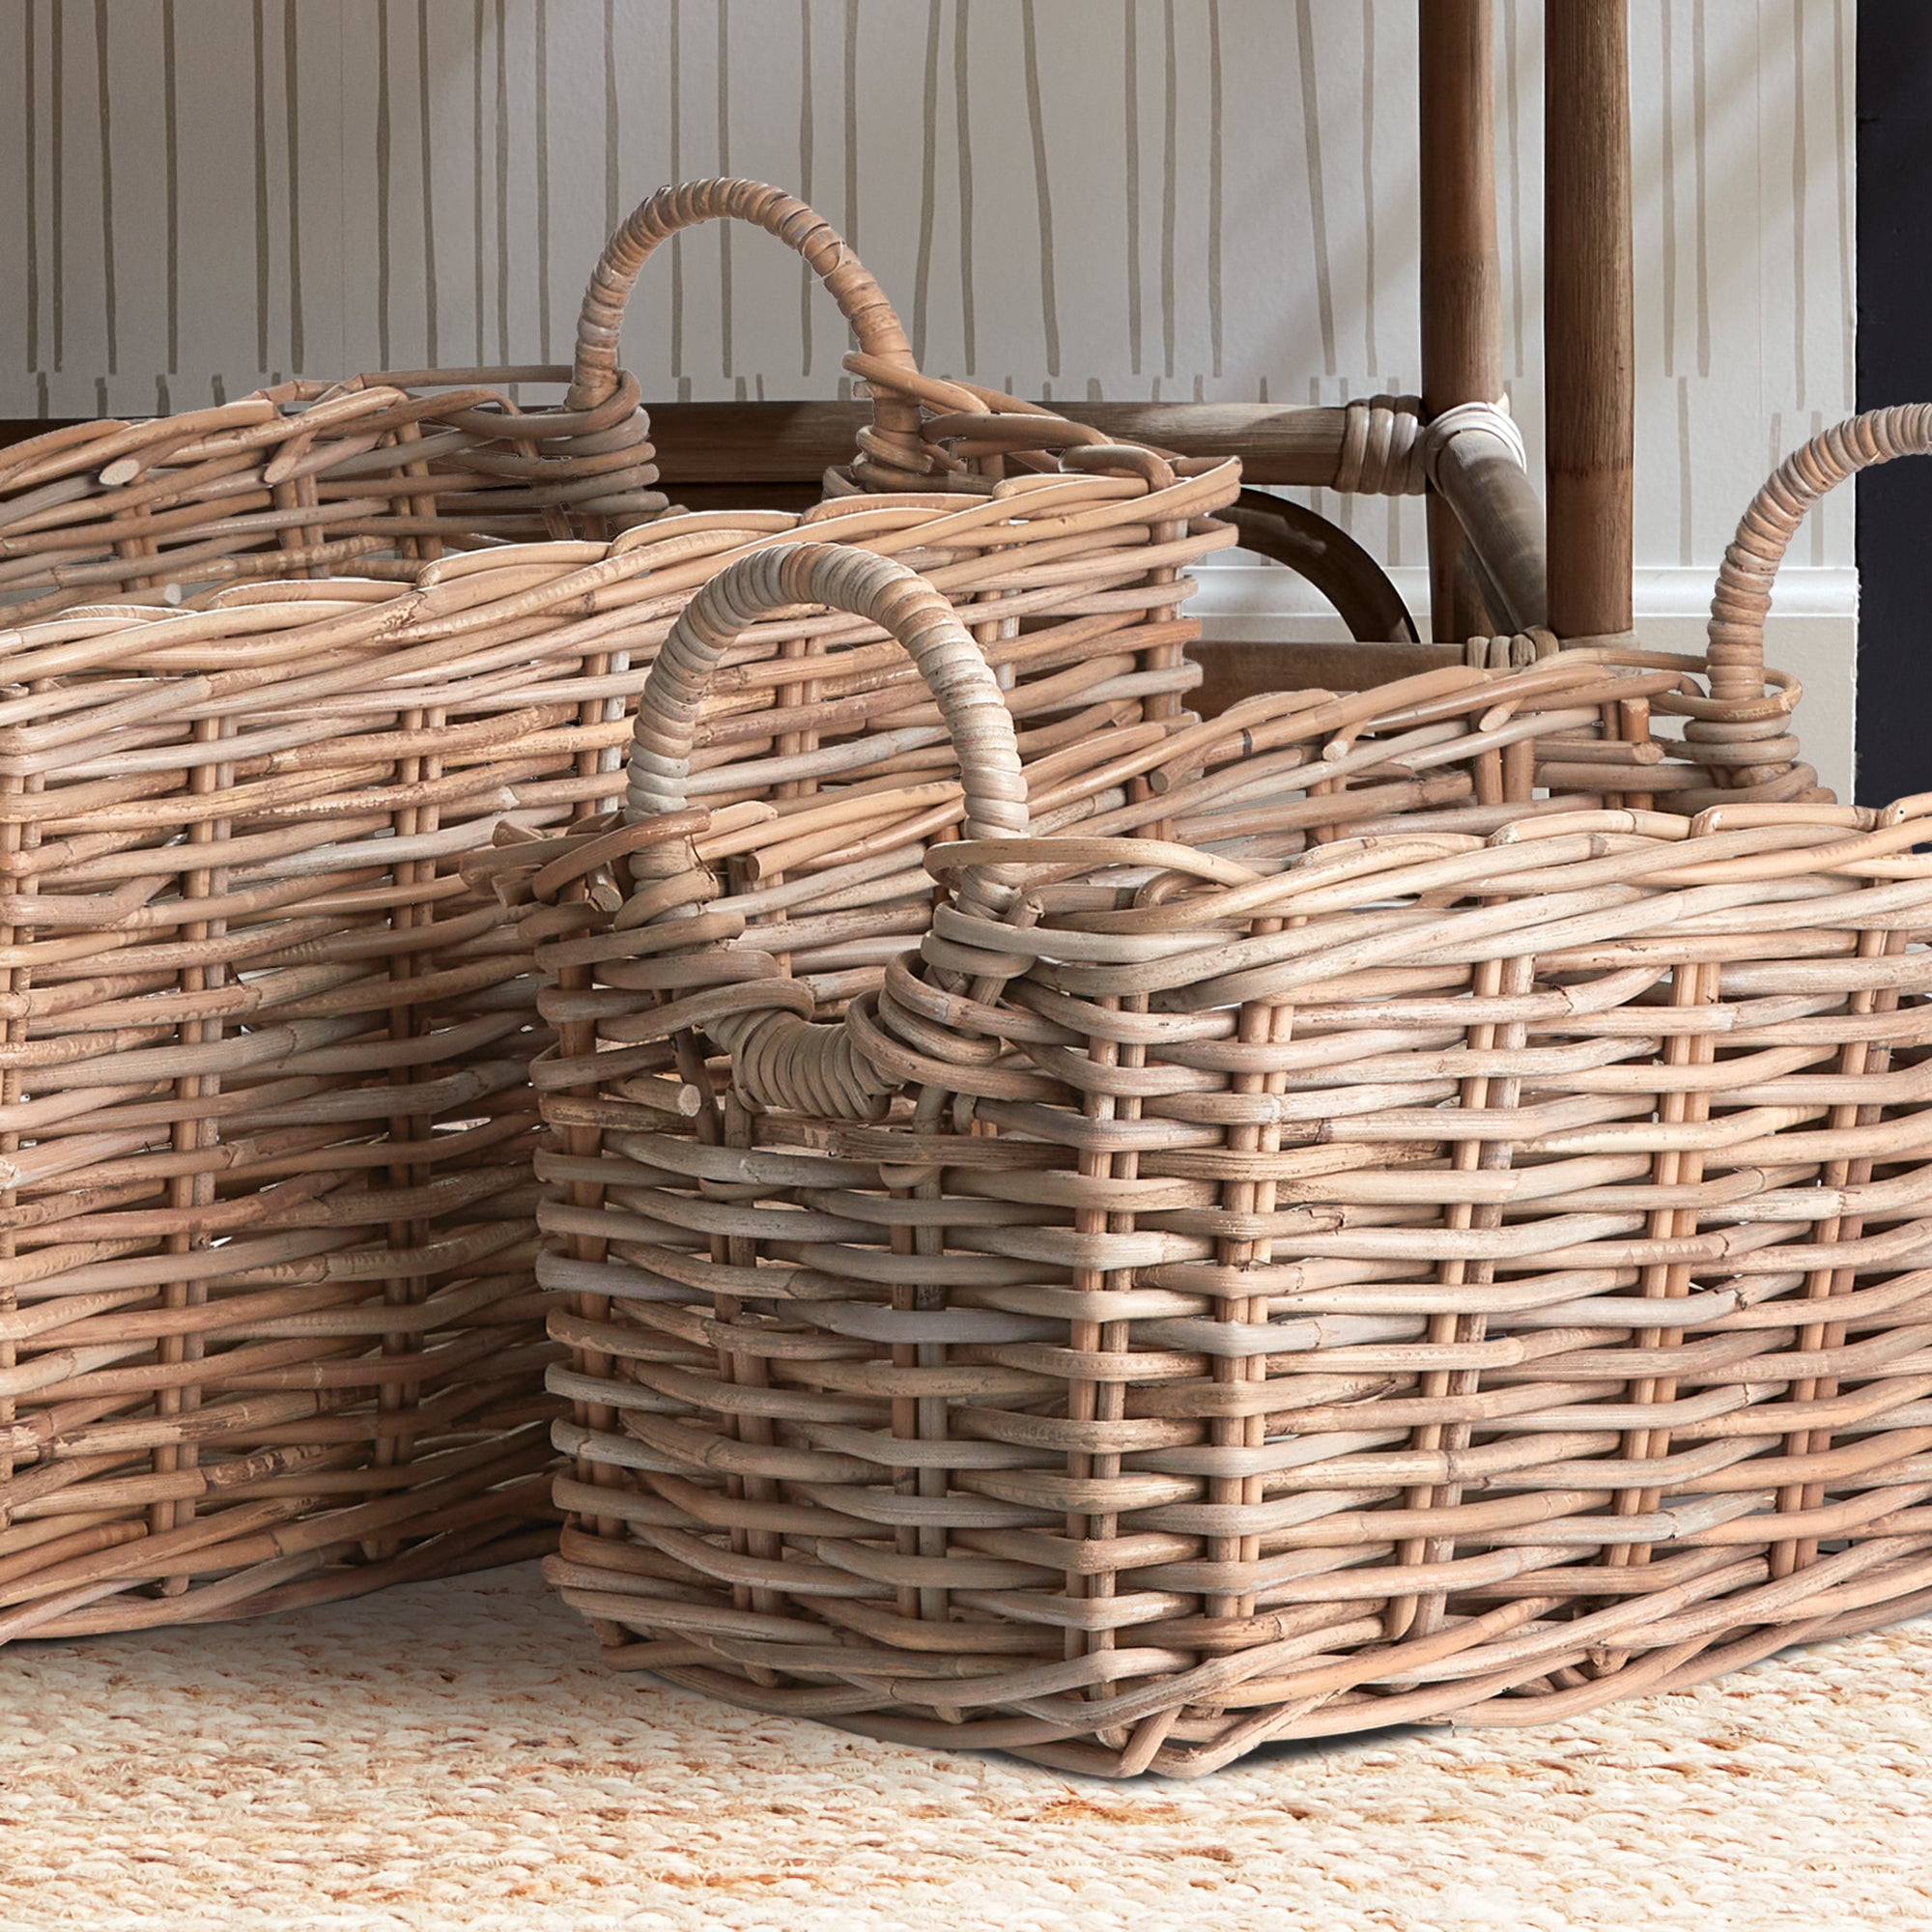 When it comes to the classic, casual appeal of rattan, these baskets are some of the best. The Halo is the cut out design of the handles that creates a unique circular detail. They make a great set of laundry baskets or any thing you need stored beautifully. Amethyst Home provides interior design, new construction, custom furniture, and area rugs in the Kansas City metro area.